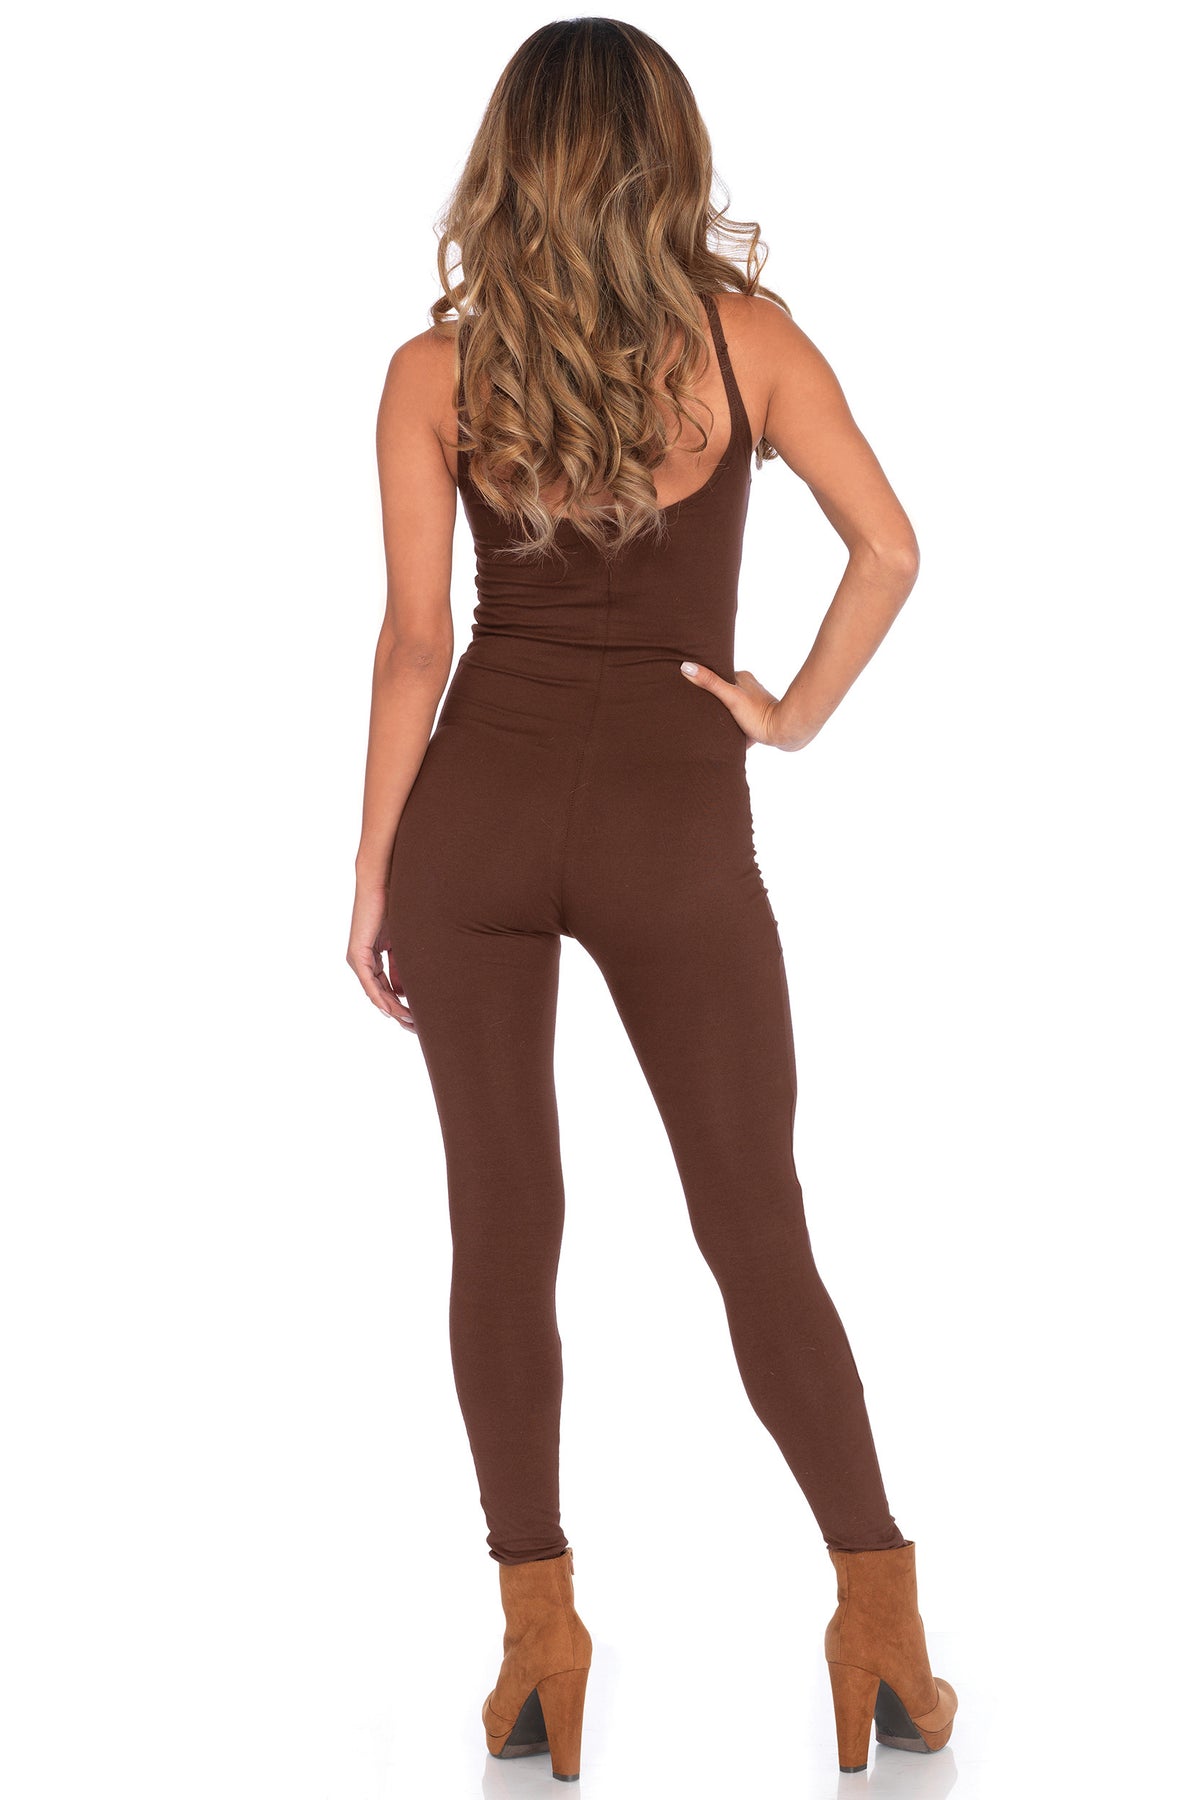 Basic Brown Catsuit